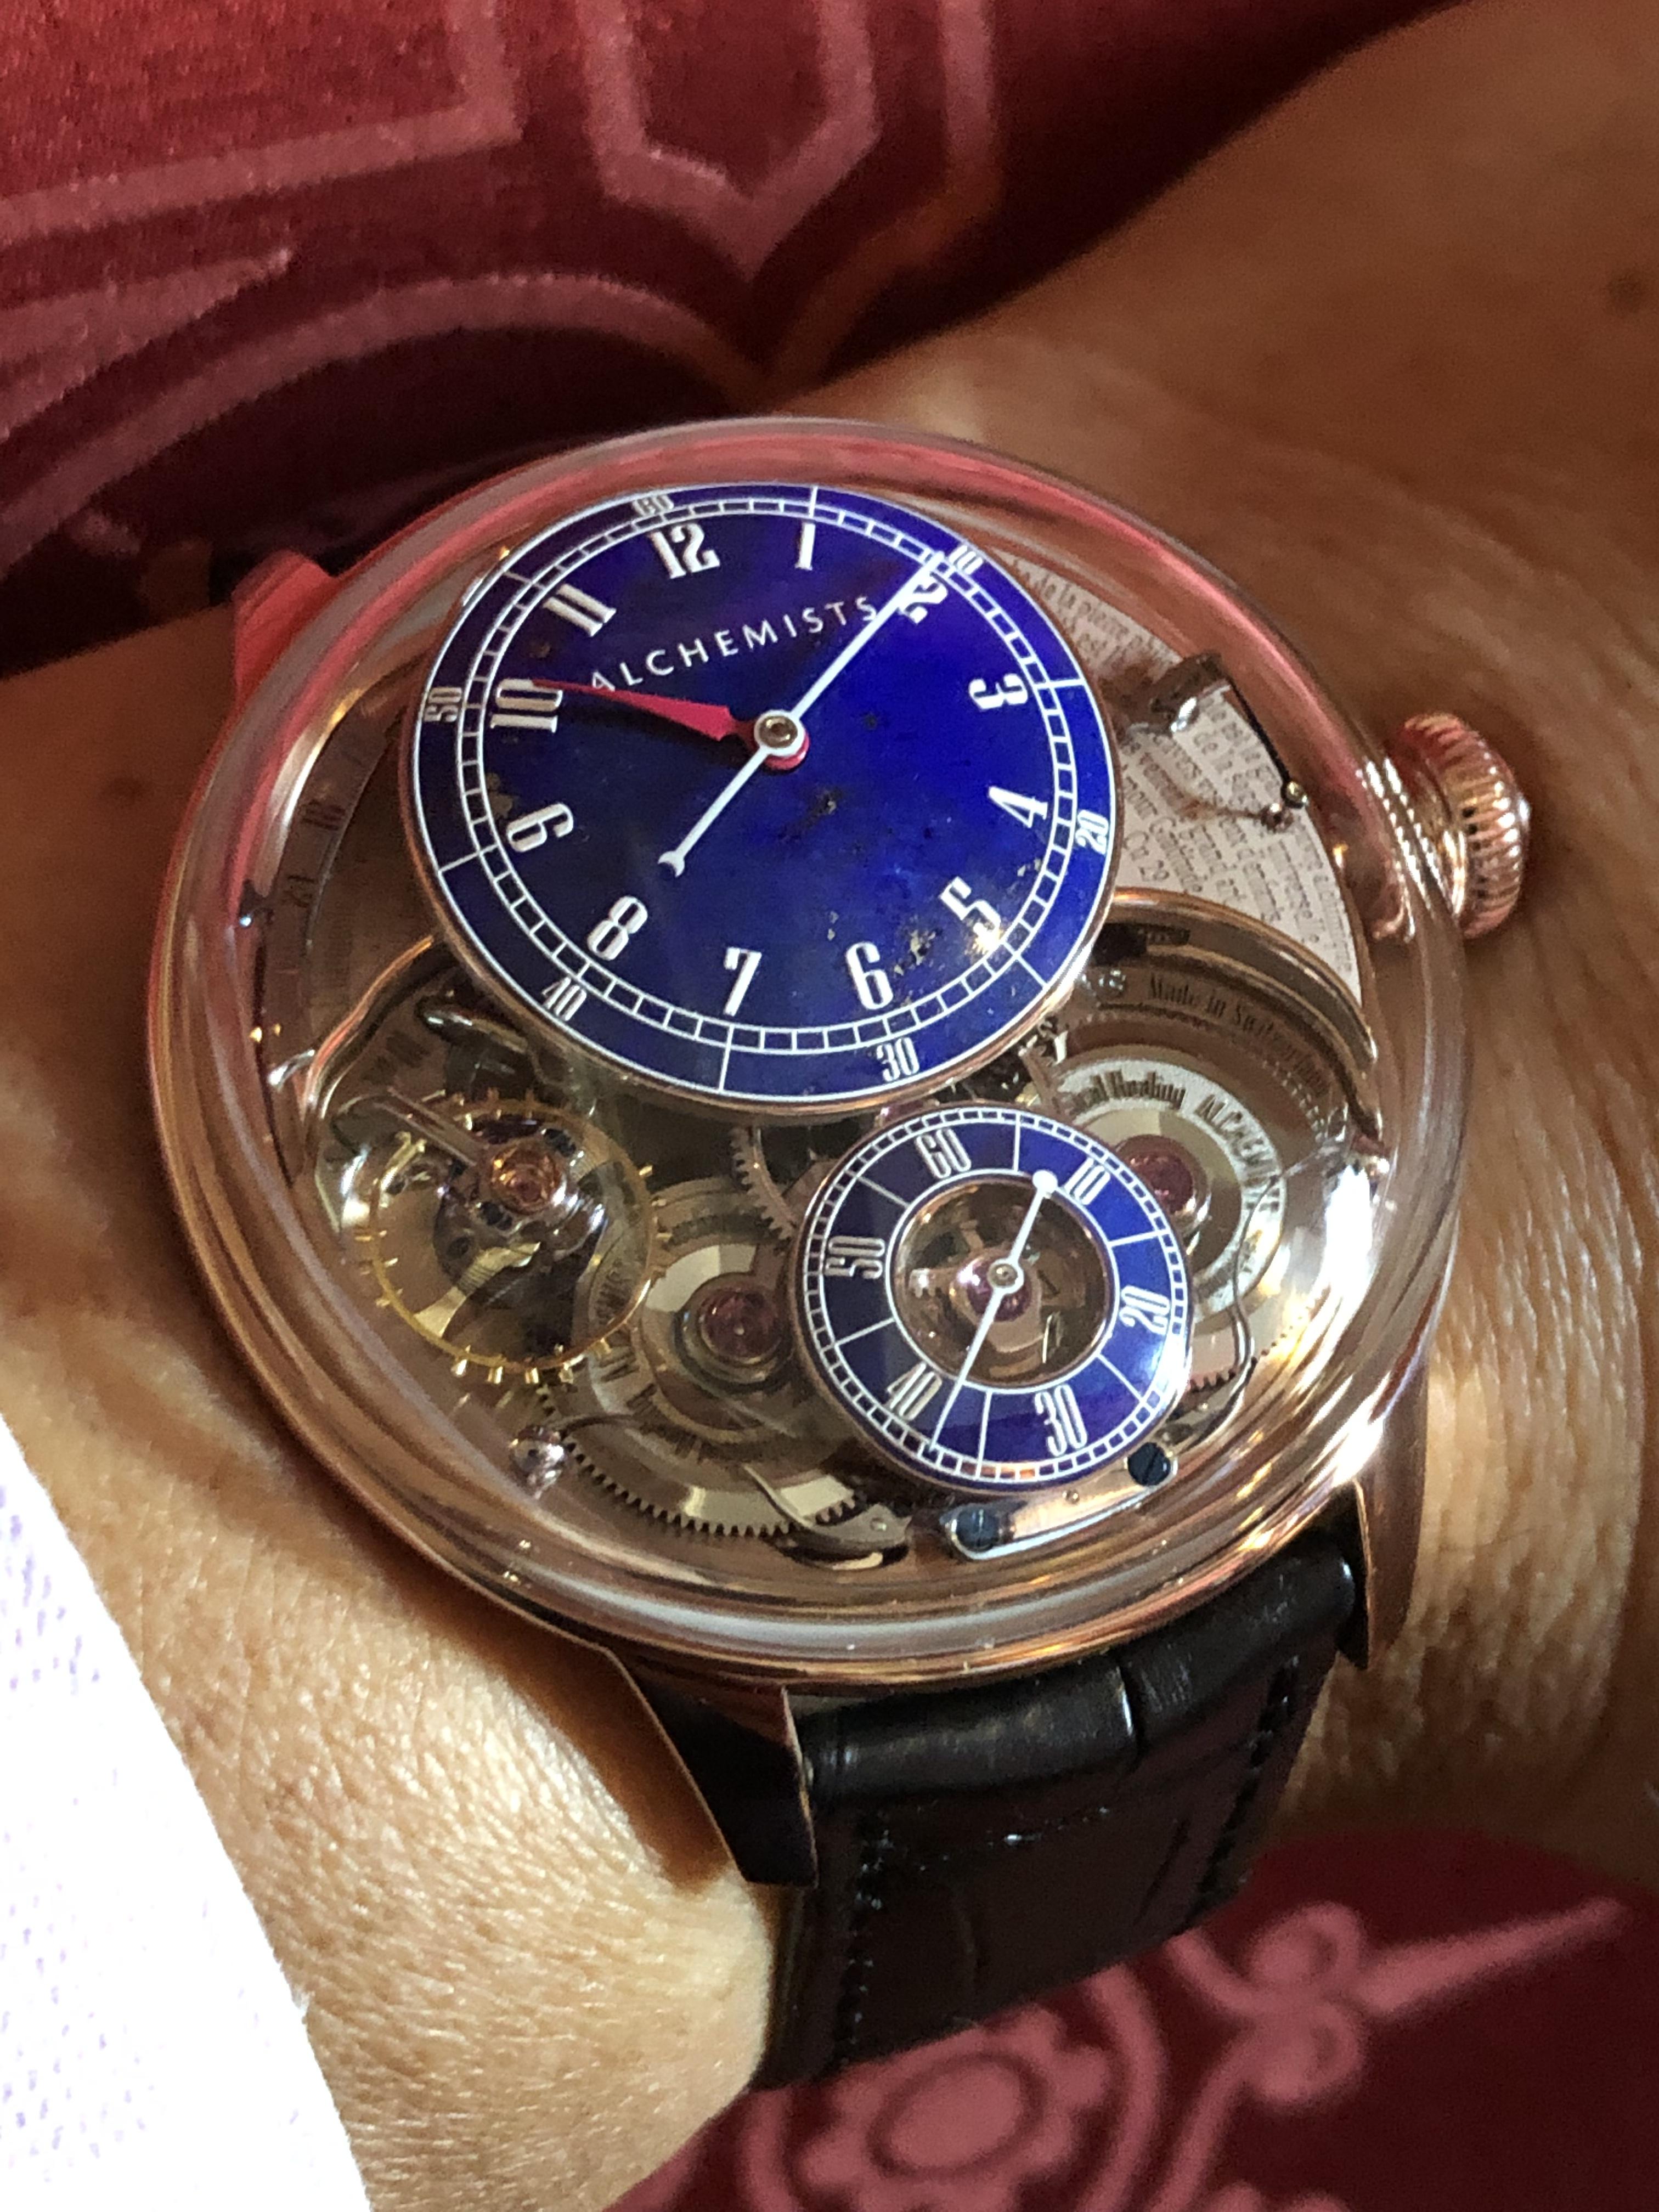 Live from Baselworld 2019 Alchemist